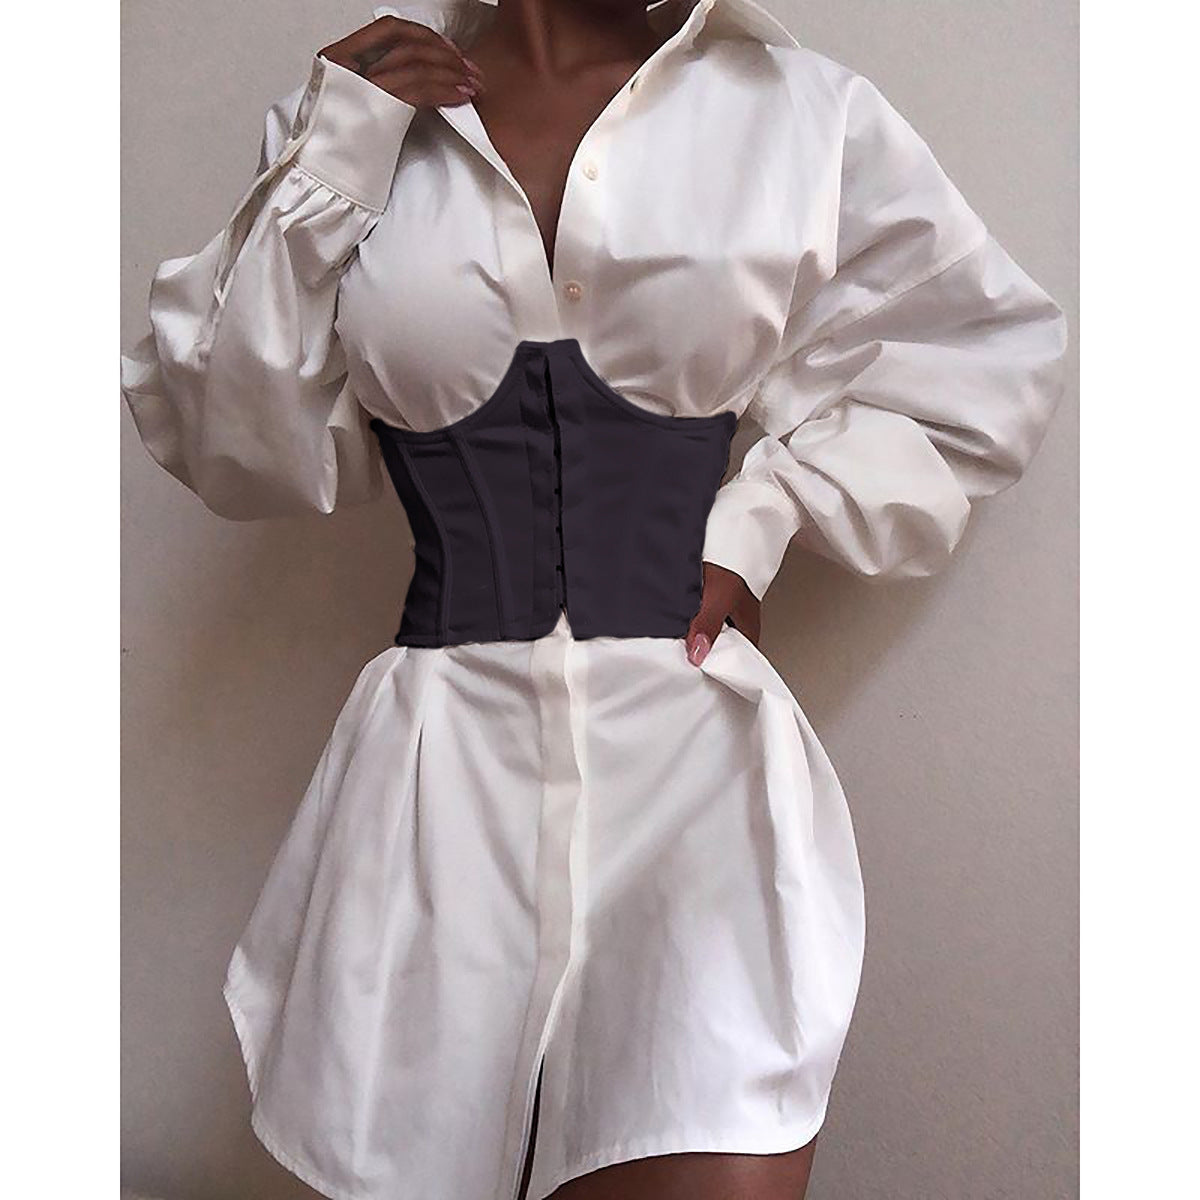 Outfit Ideas Fashion Outfit | Waist Belly Contraction Corset Outfit Top